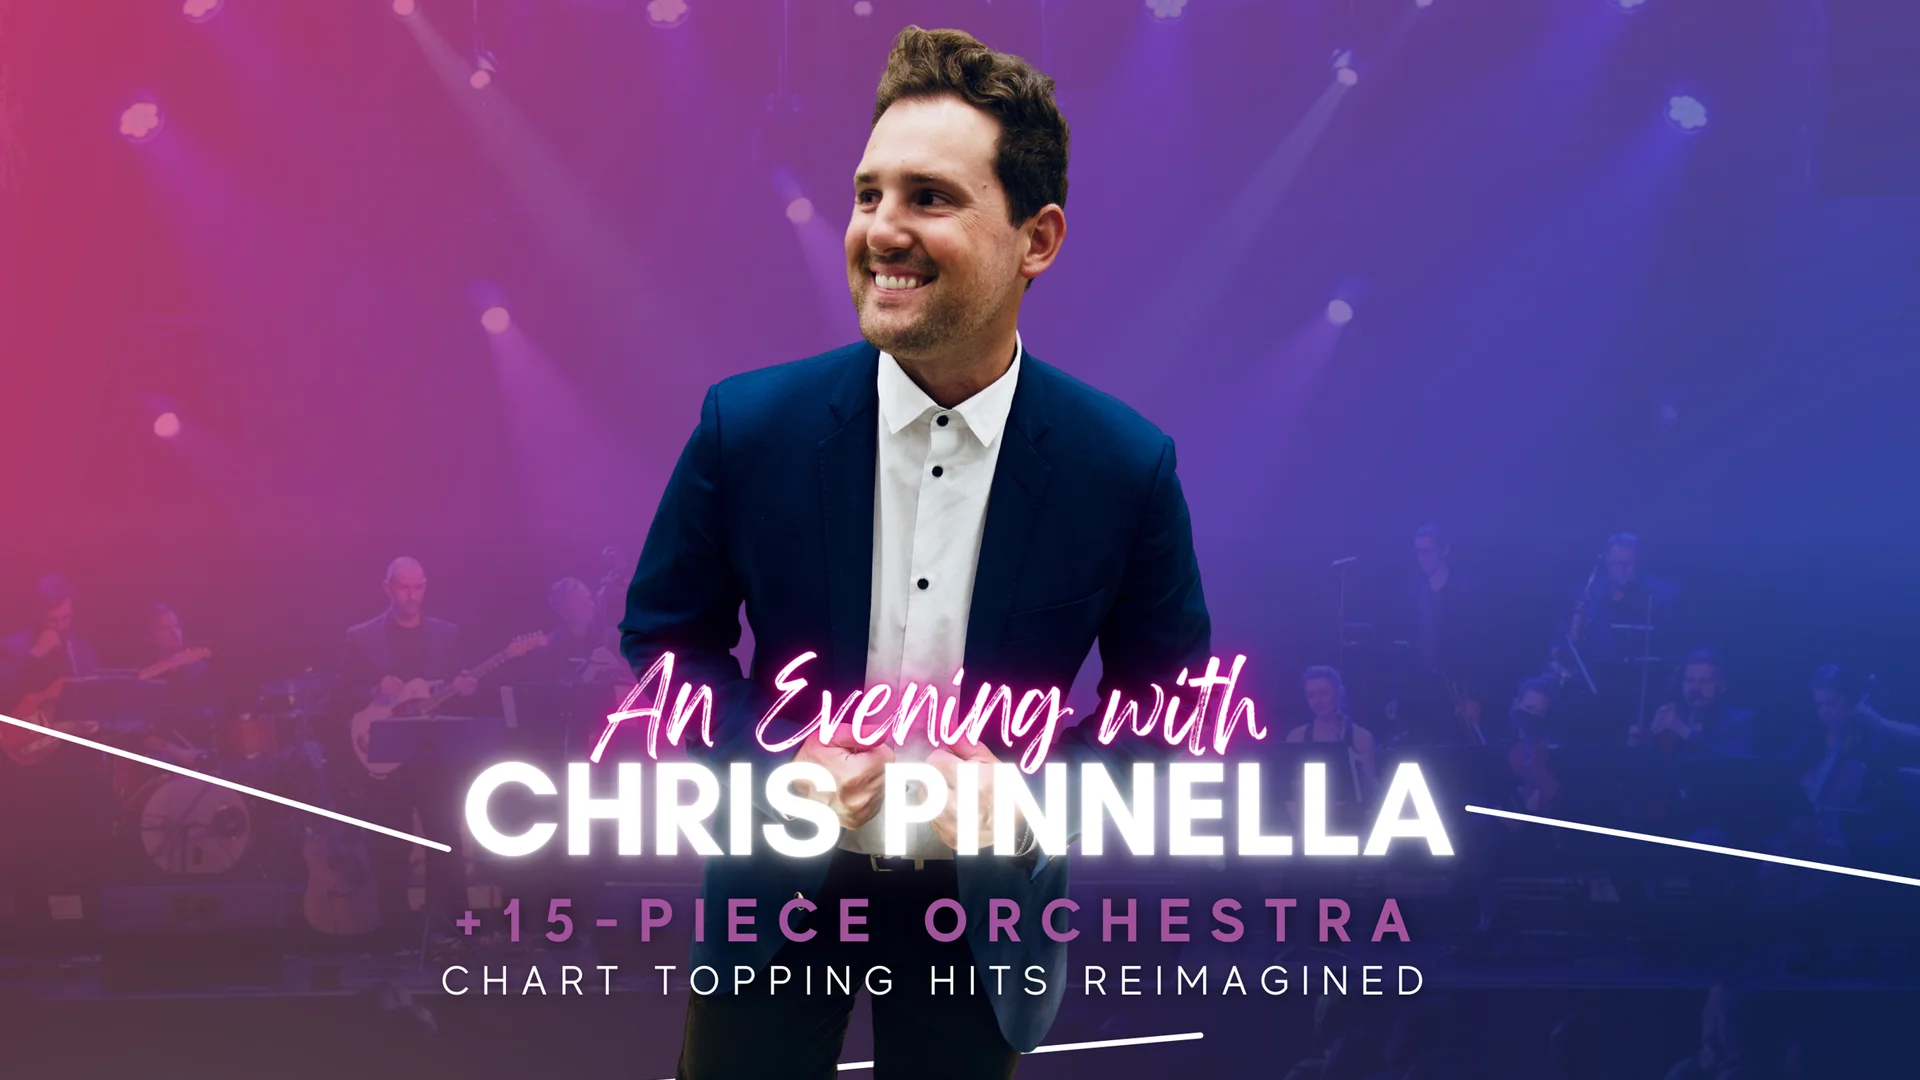 An Evening with Chris Pinnella and 15-Piece Orchestra